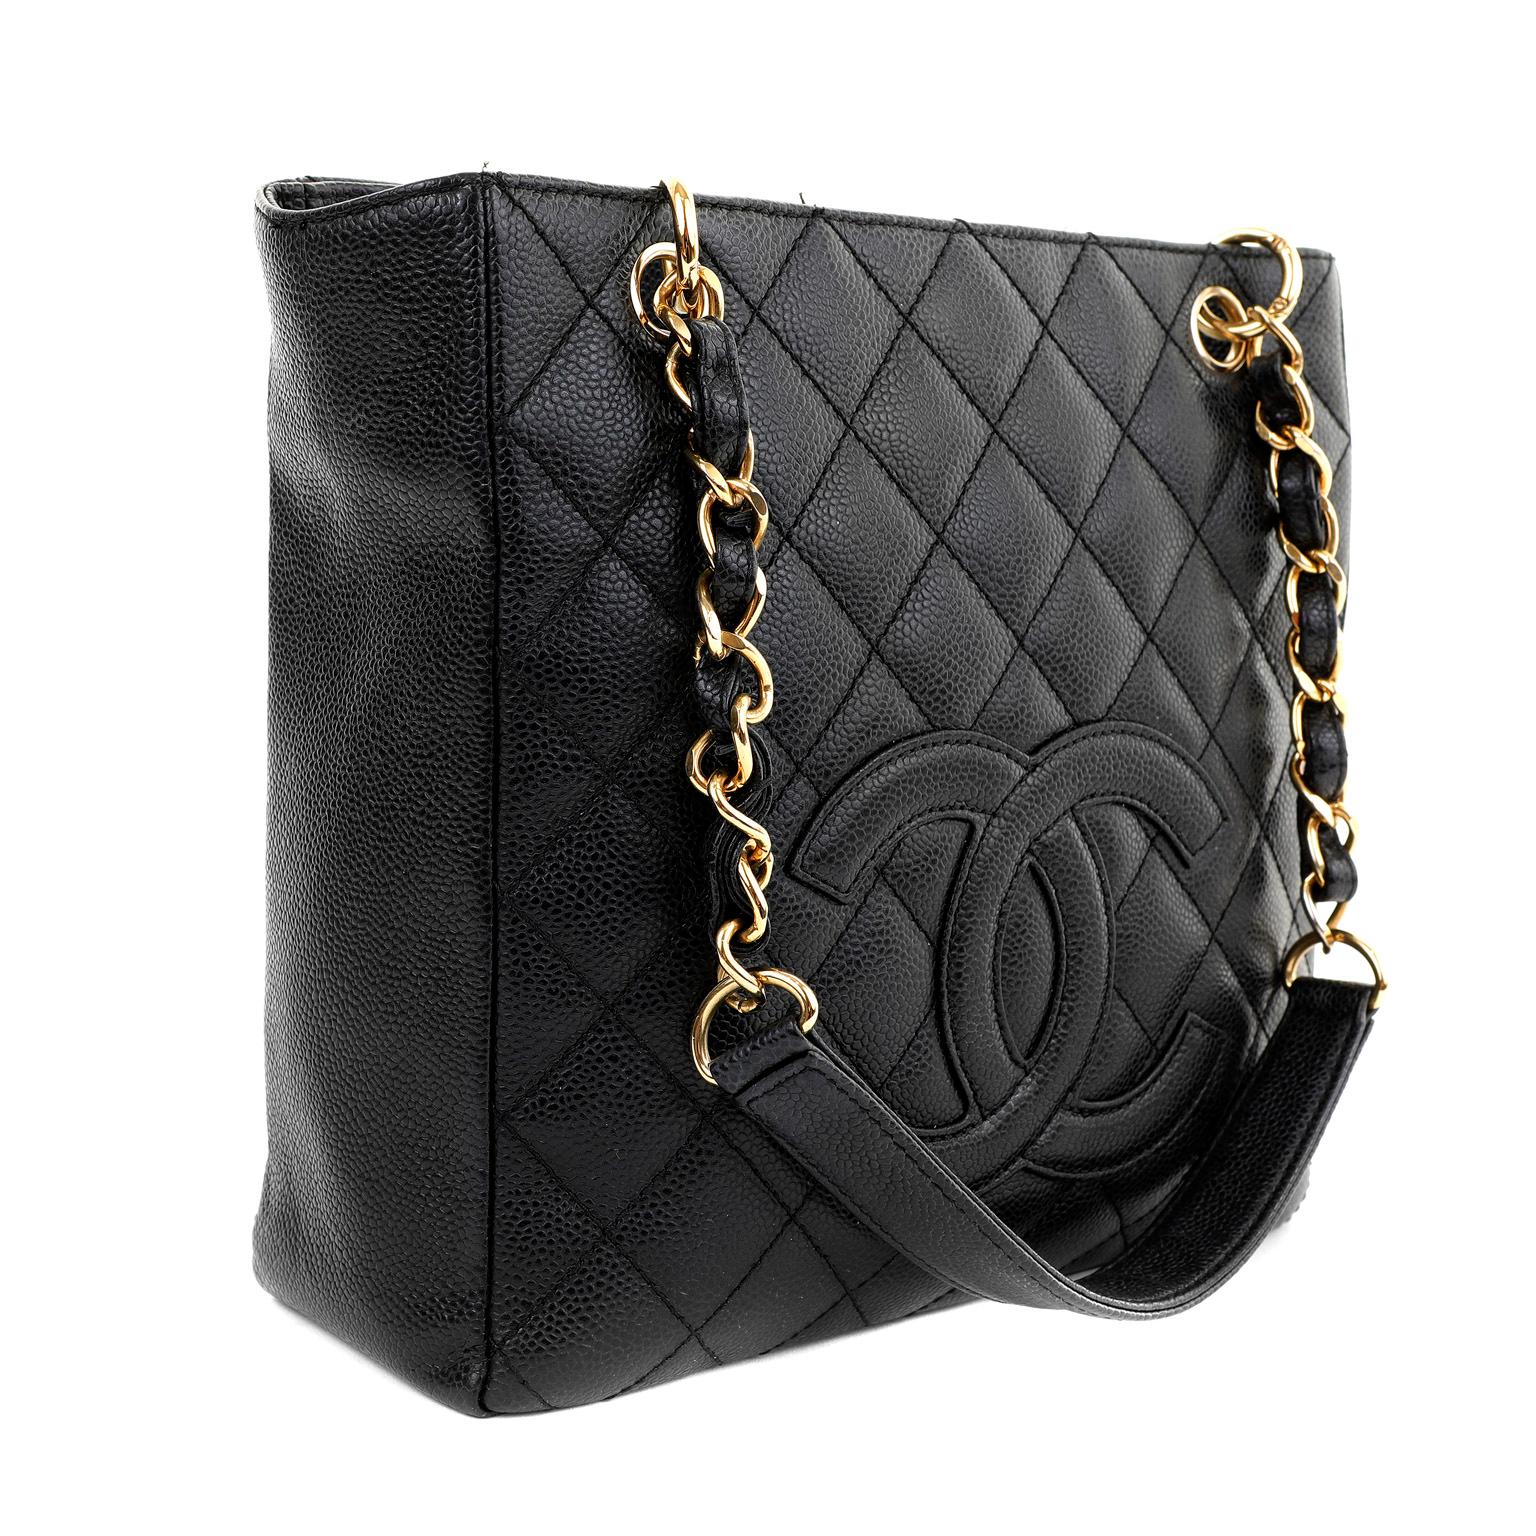 This authentic Chanel Black Caviar Petit Shopping Tote is in pristine condition.  The beloved PST is from the Timeless Classics Collection and is a versatile accompaniment to any ensemble. 
Textured and durable black caviar leather is quilted in